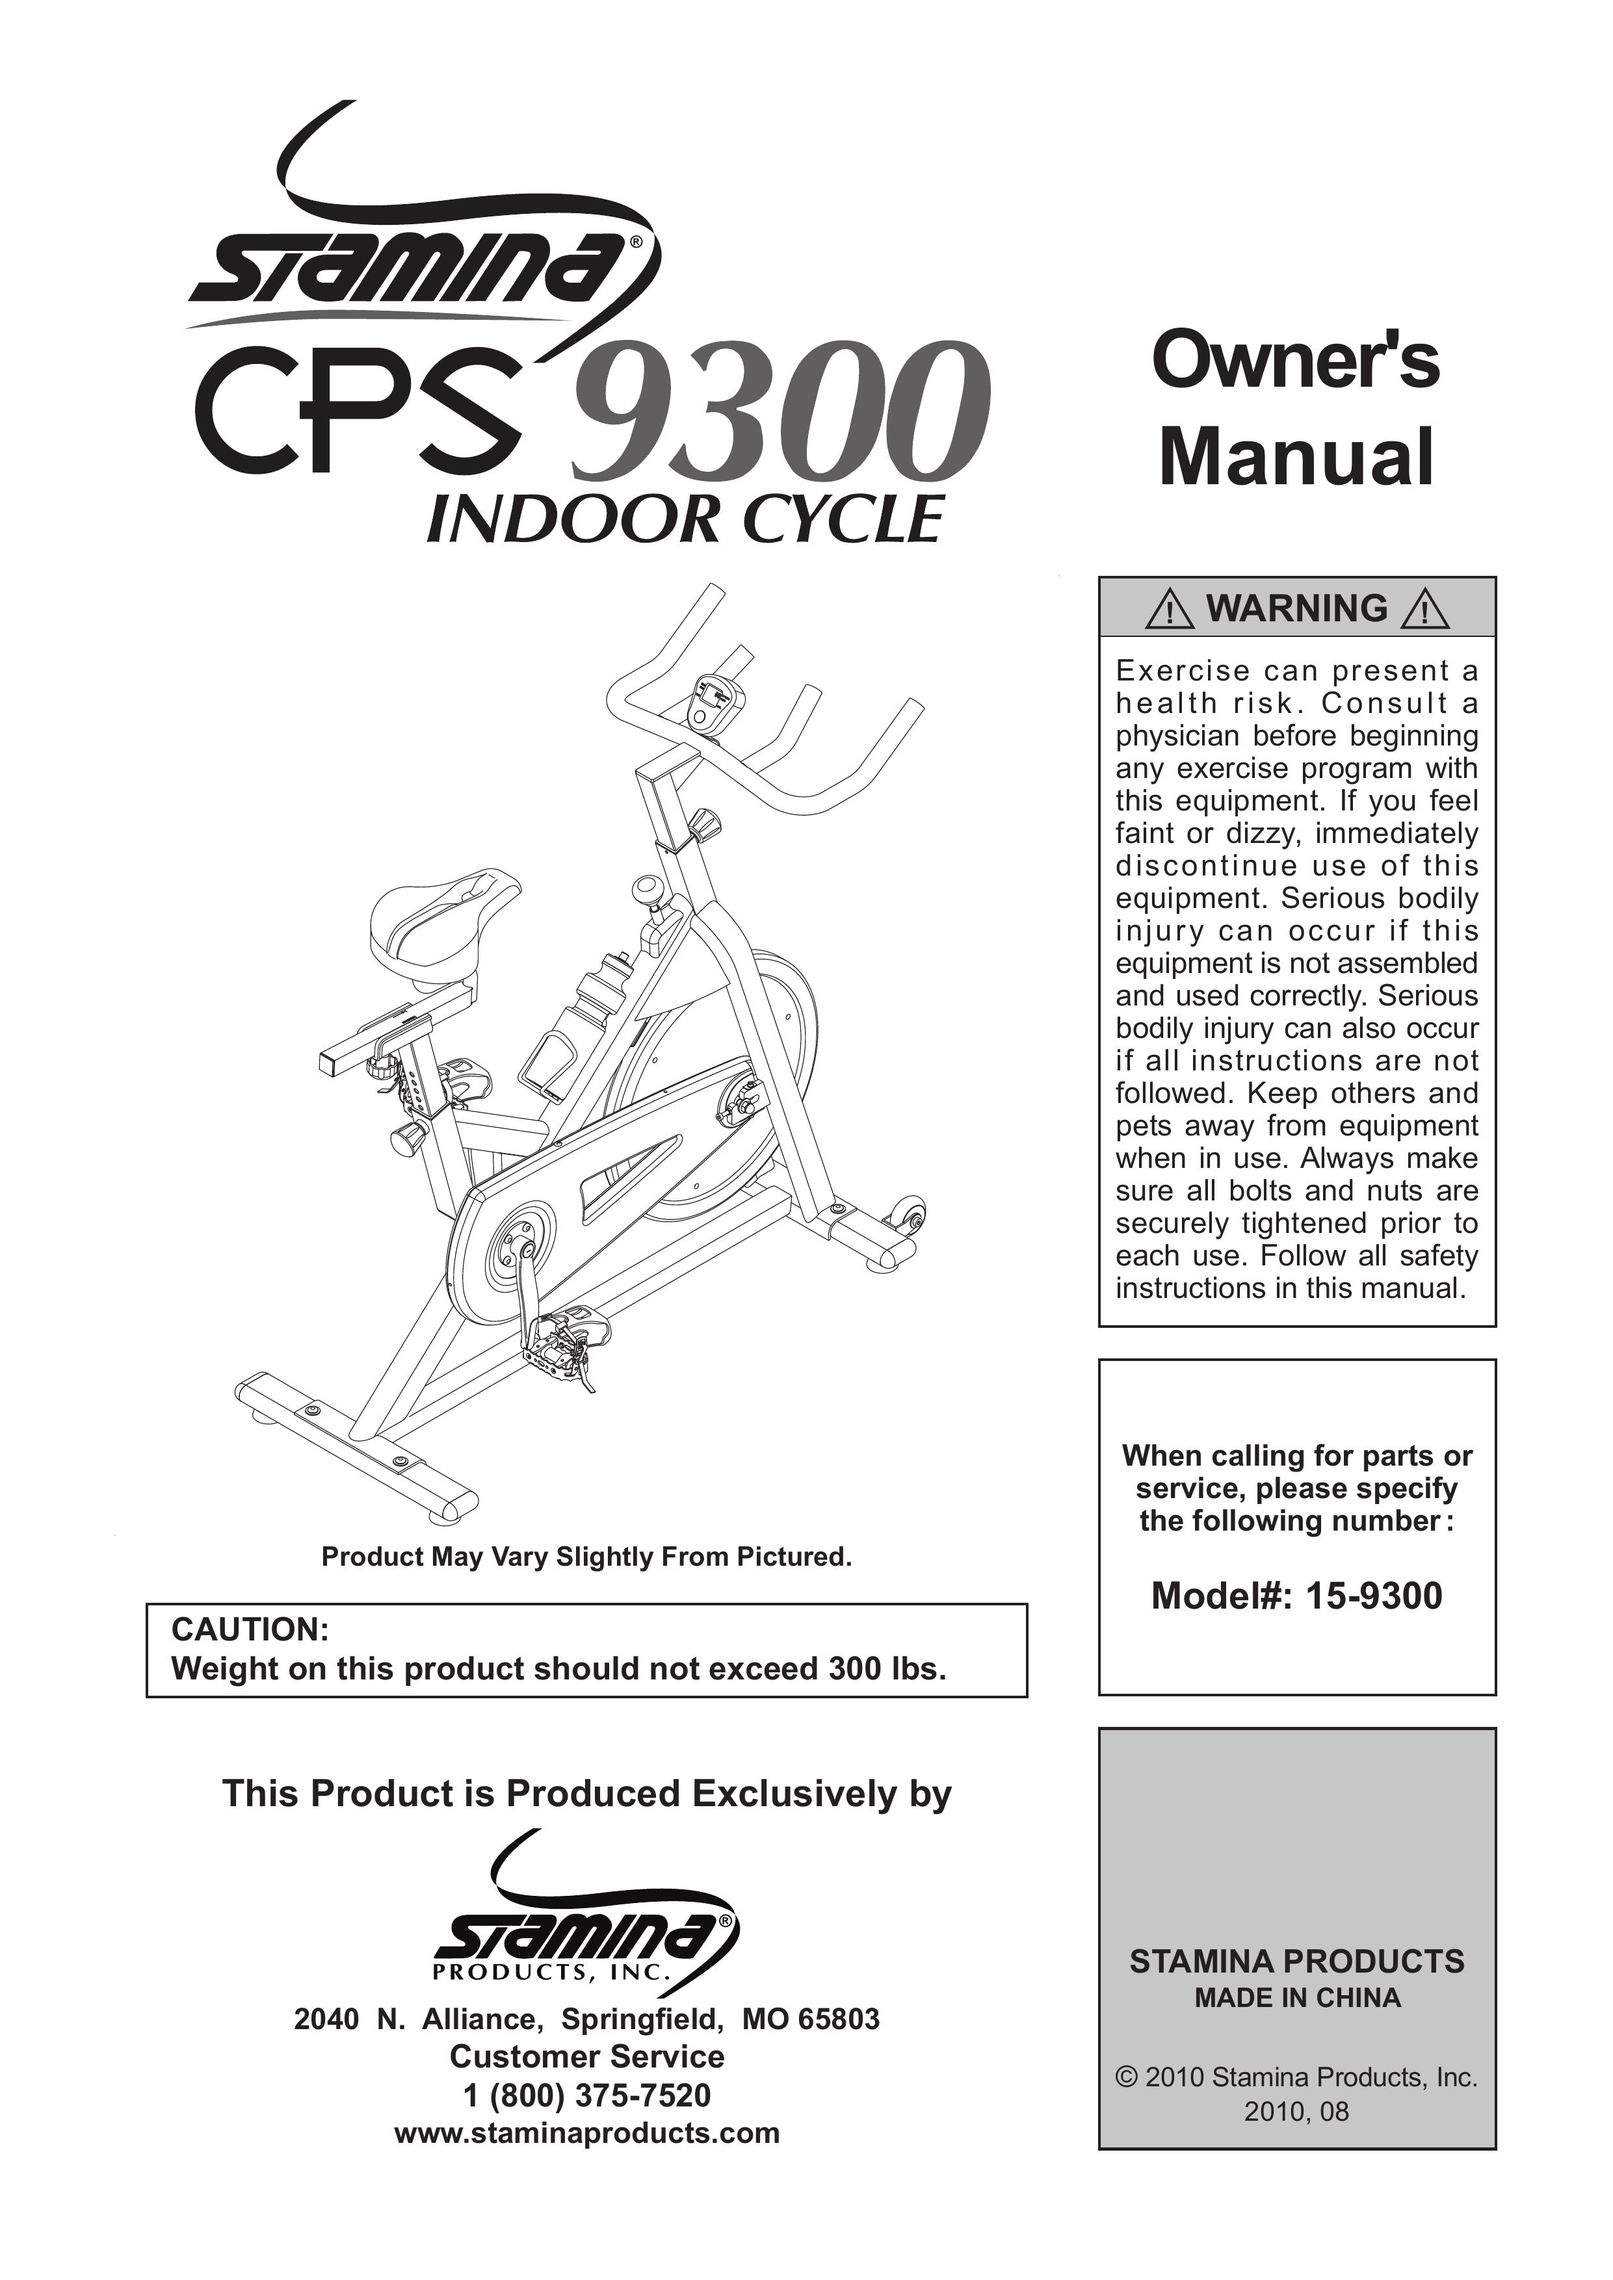 Stamina Products 15-9300 Exercise Bike User Manual